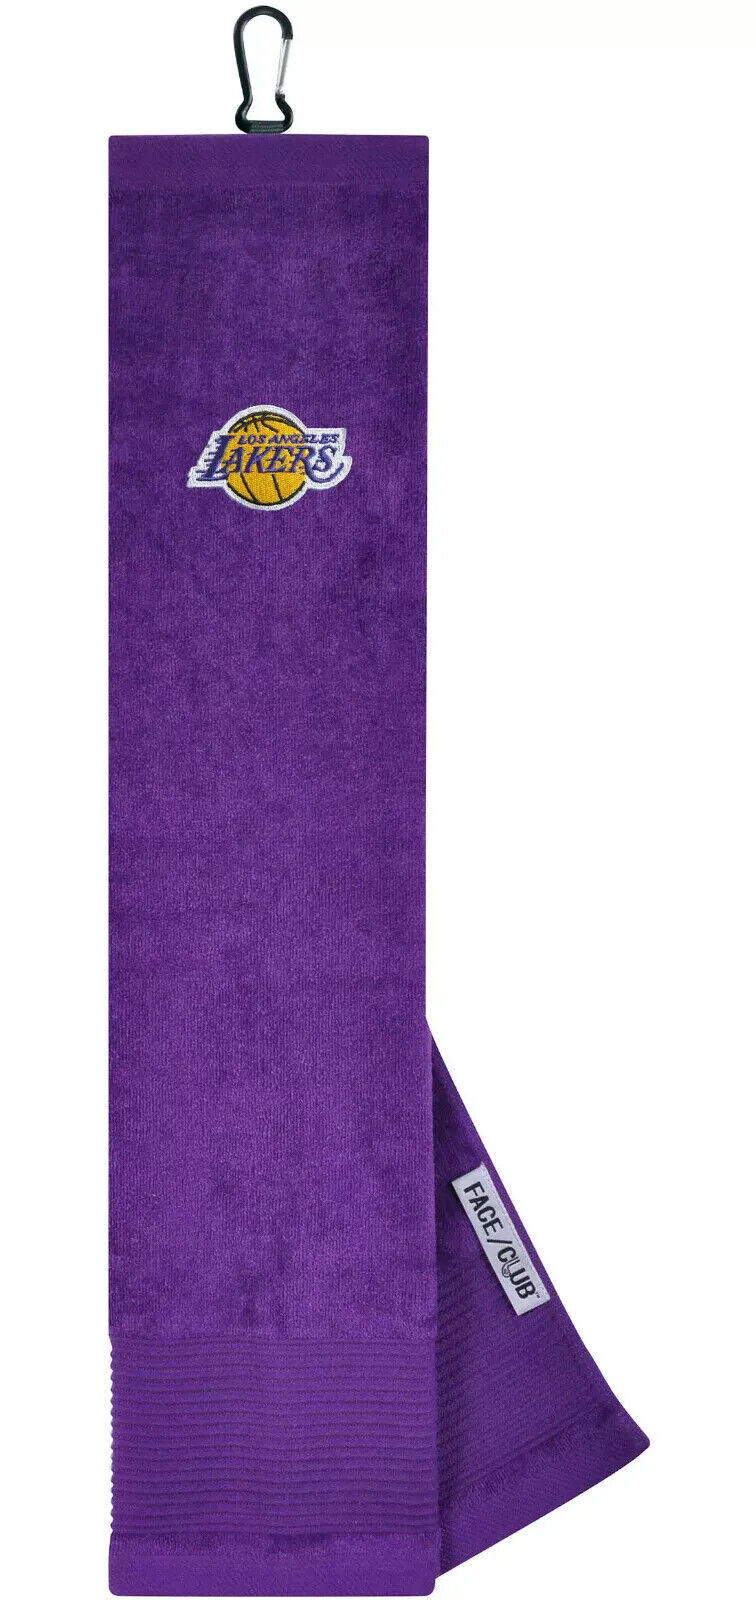 LOS ANGELES LAKERS Popular shop is the lowest price challenge Wincraft Embroidered Dual-Textured 16 GO NEW before selling 24 x